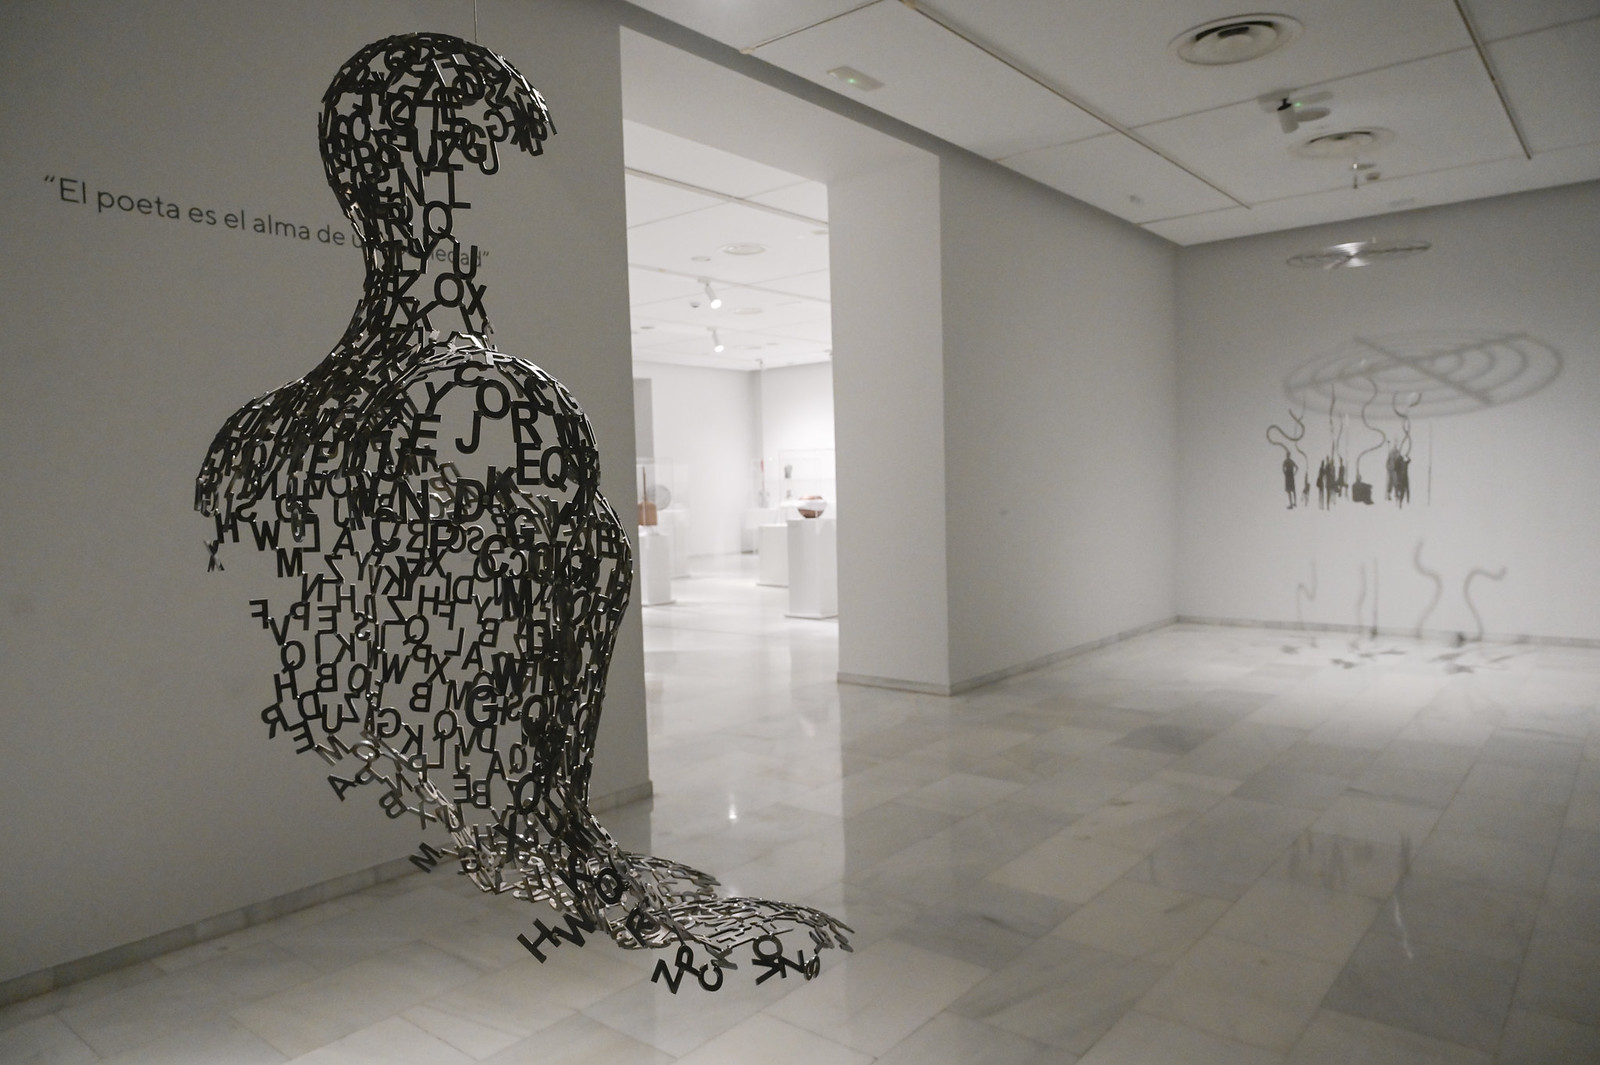 Image of a sculpture by Jaume Plensa